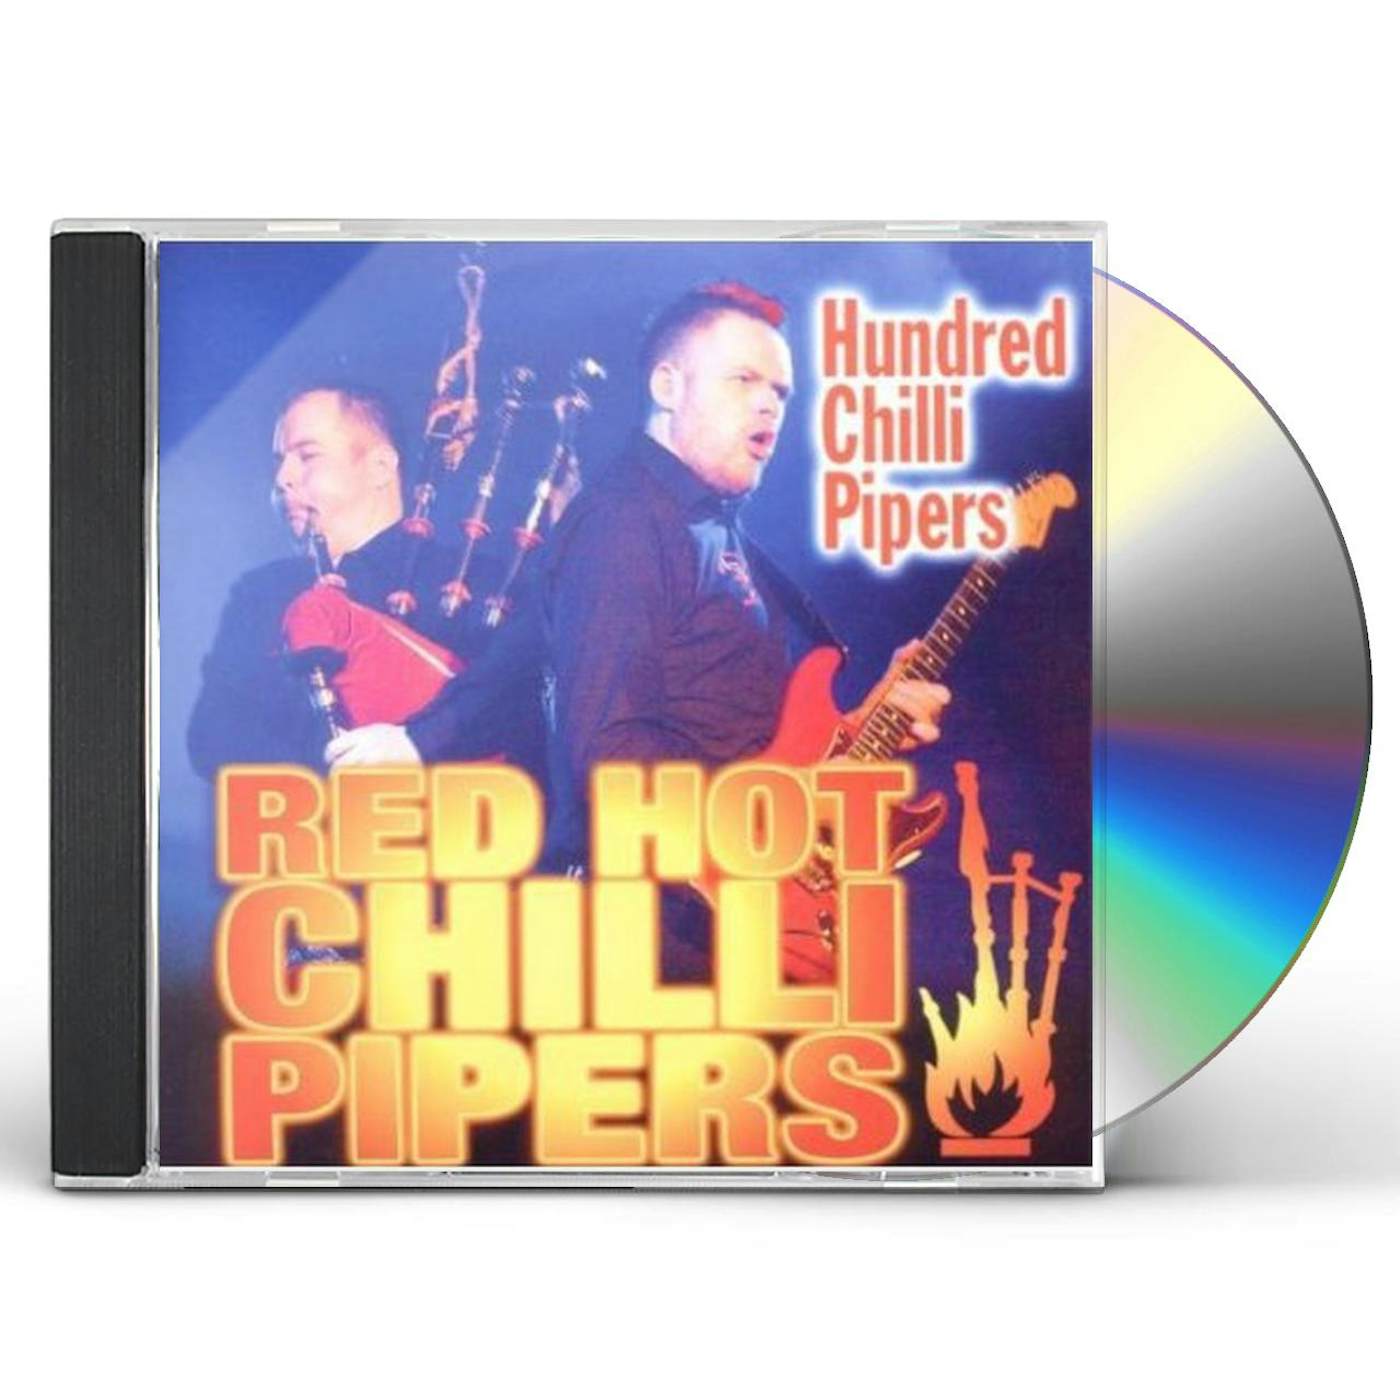 Red Hot Chilli Pipers HUNDRED CHILLI PIPERS CD